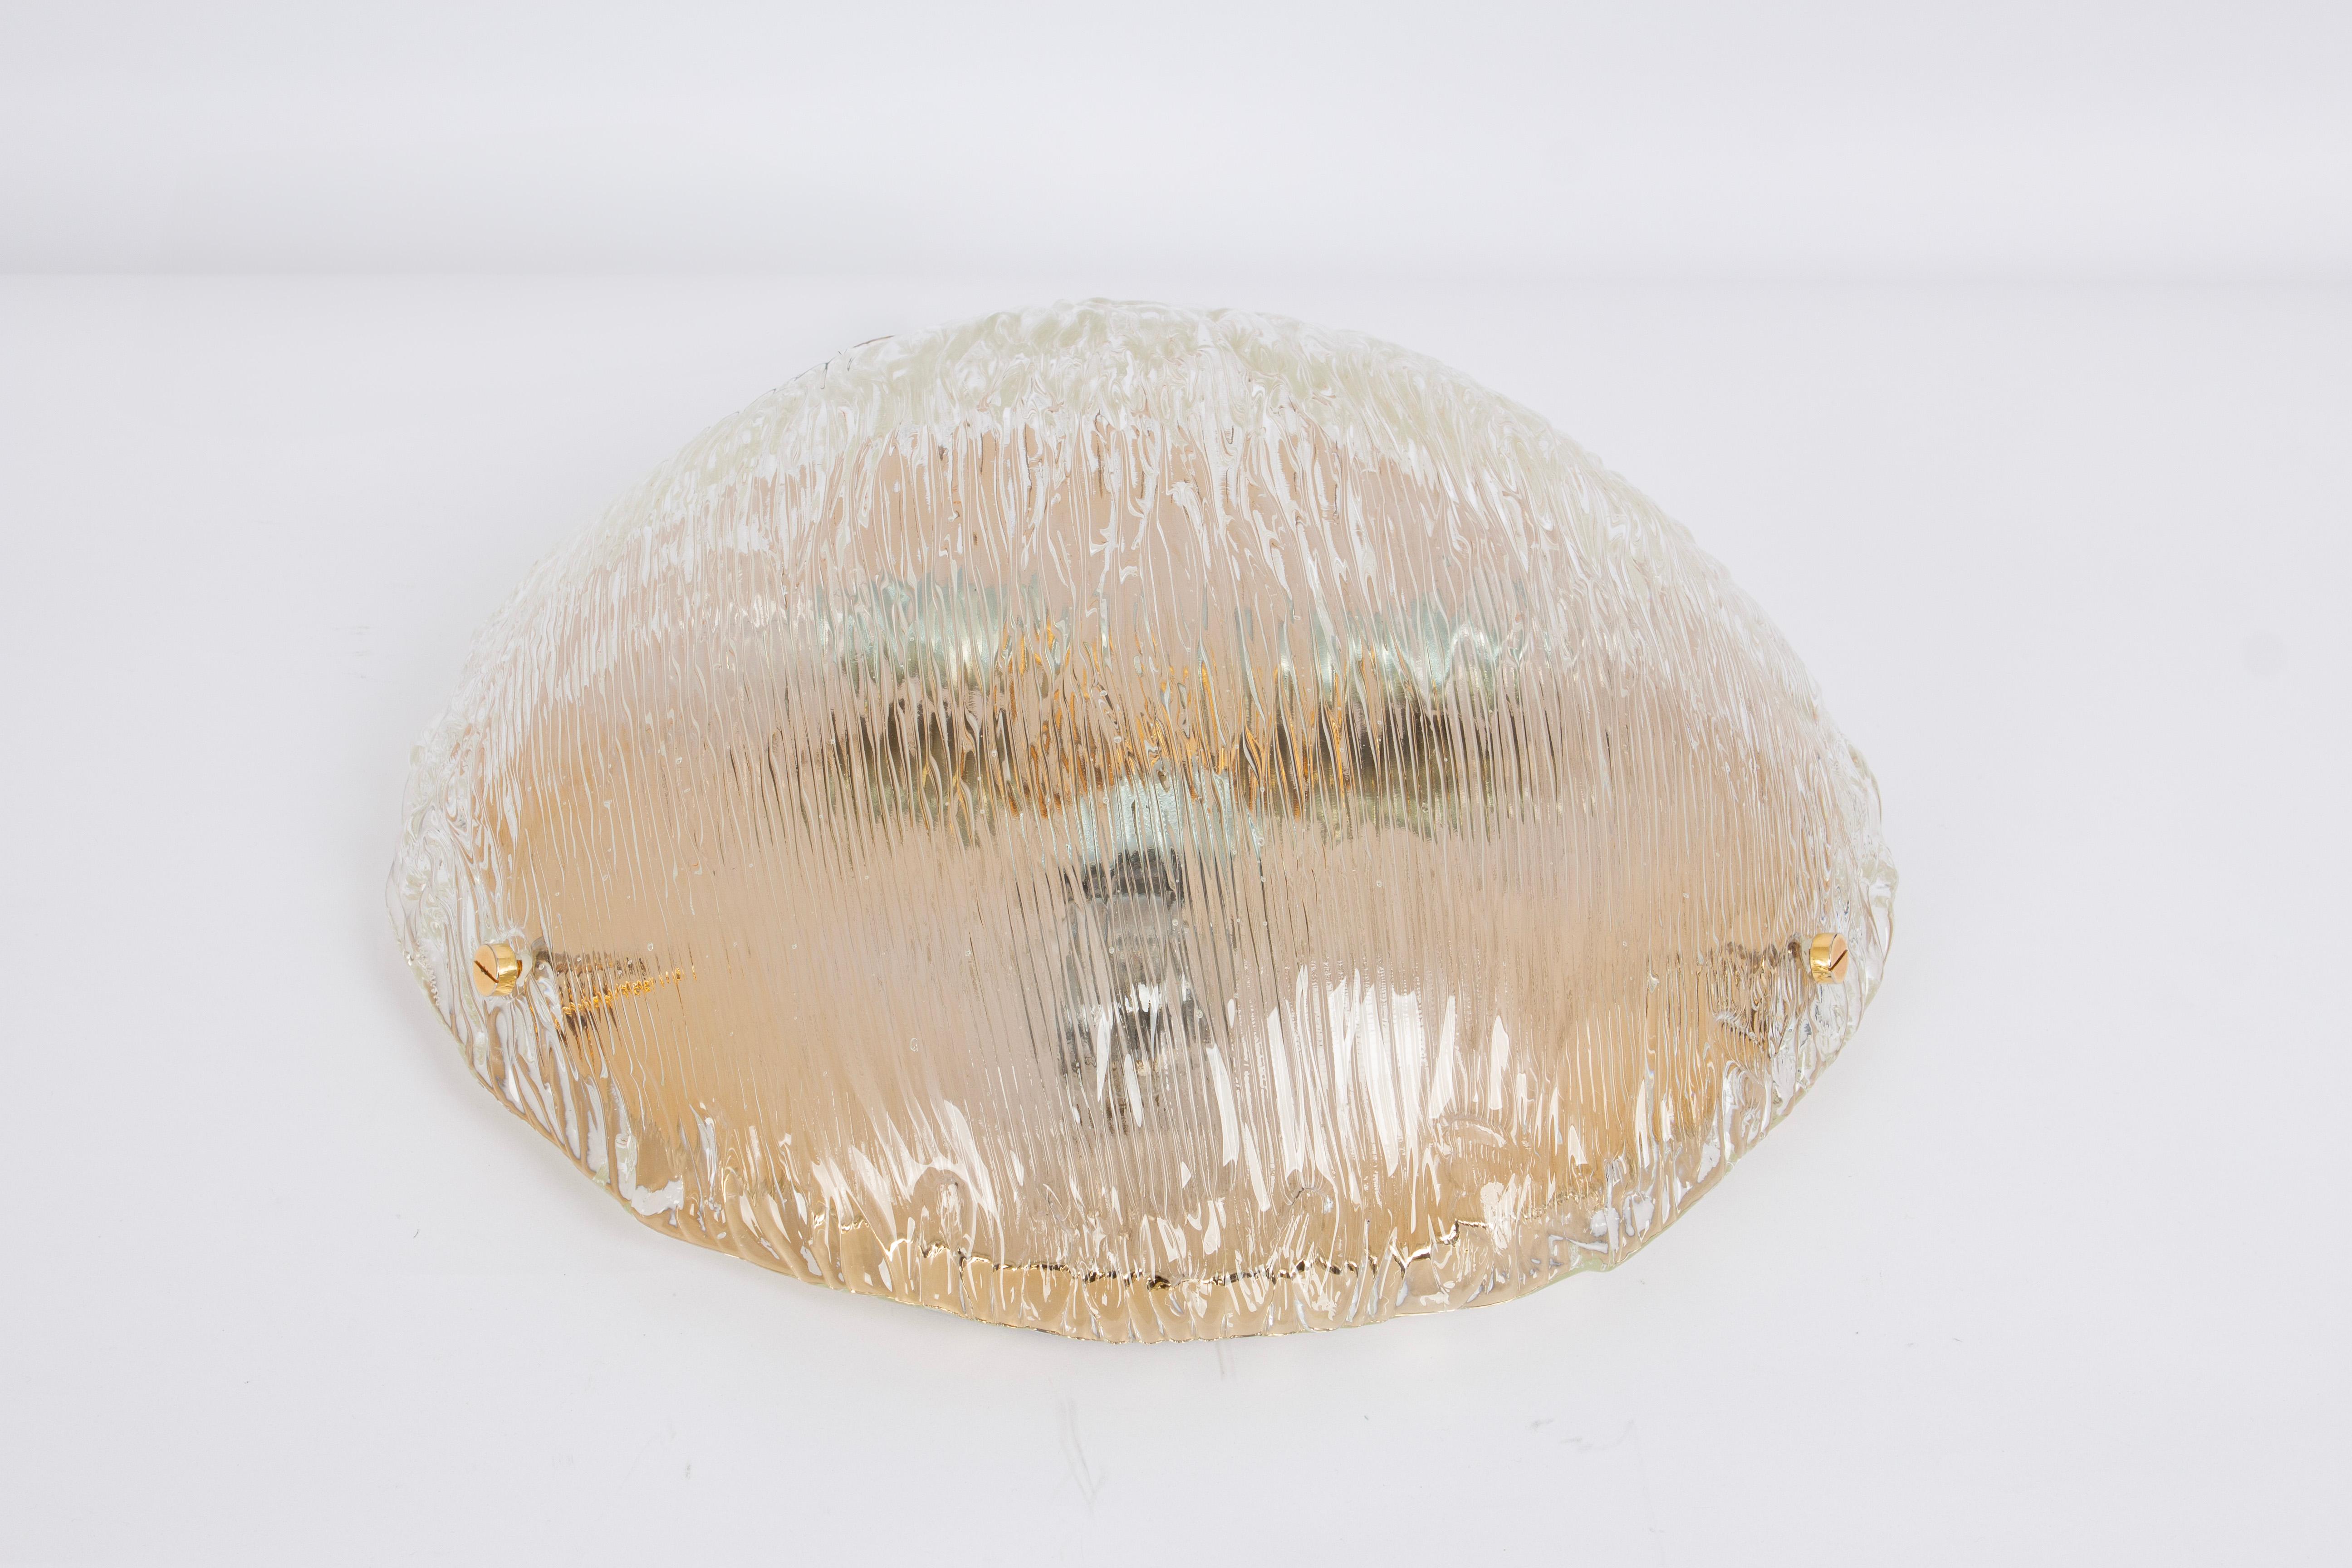 Mid-20th Century Large Venini Ceiling Lights Attributed to Carlo Scarpa for Venini, 1950s For Sale